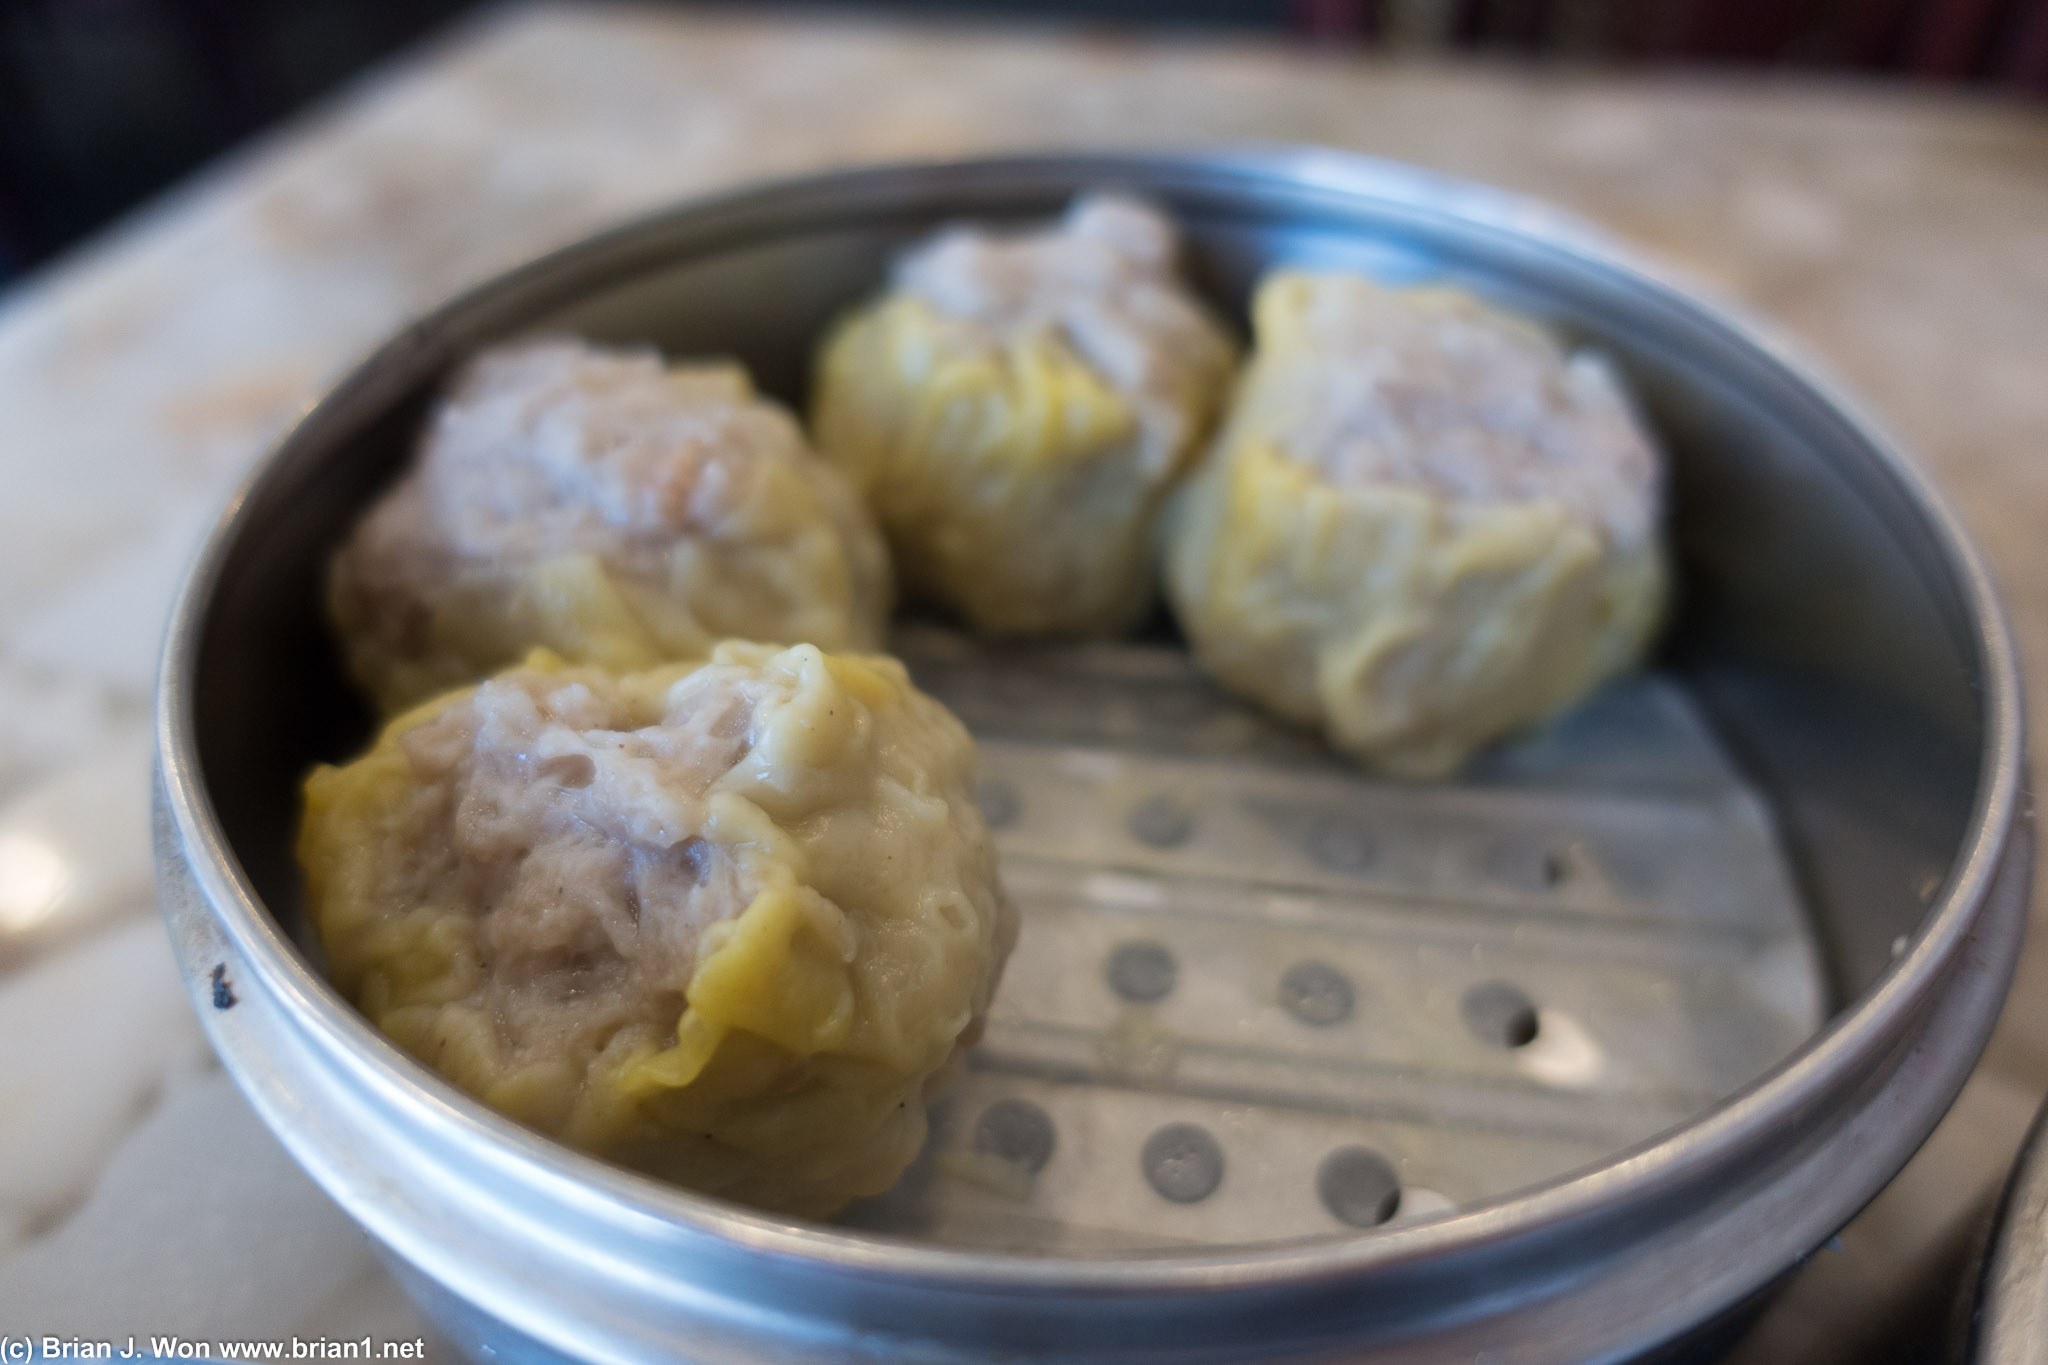 DItto for the shu mai. It was poor.